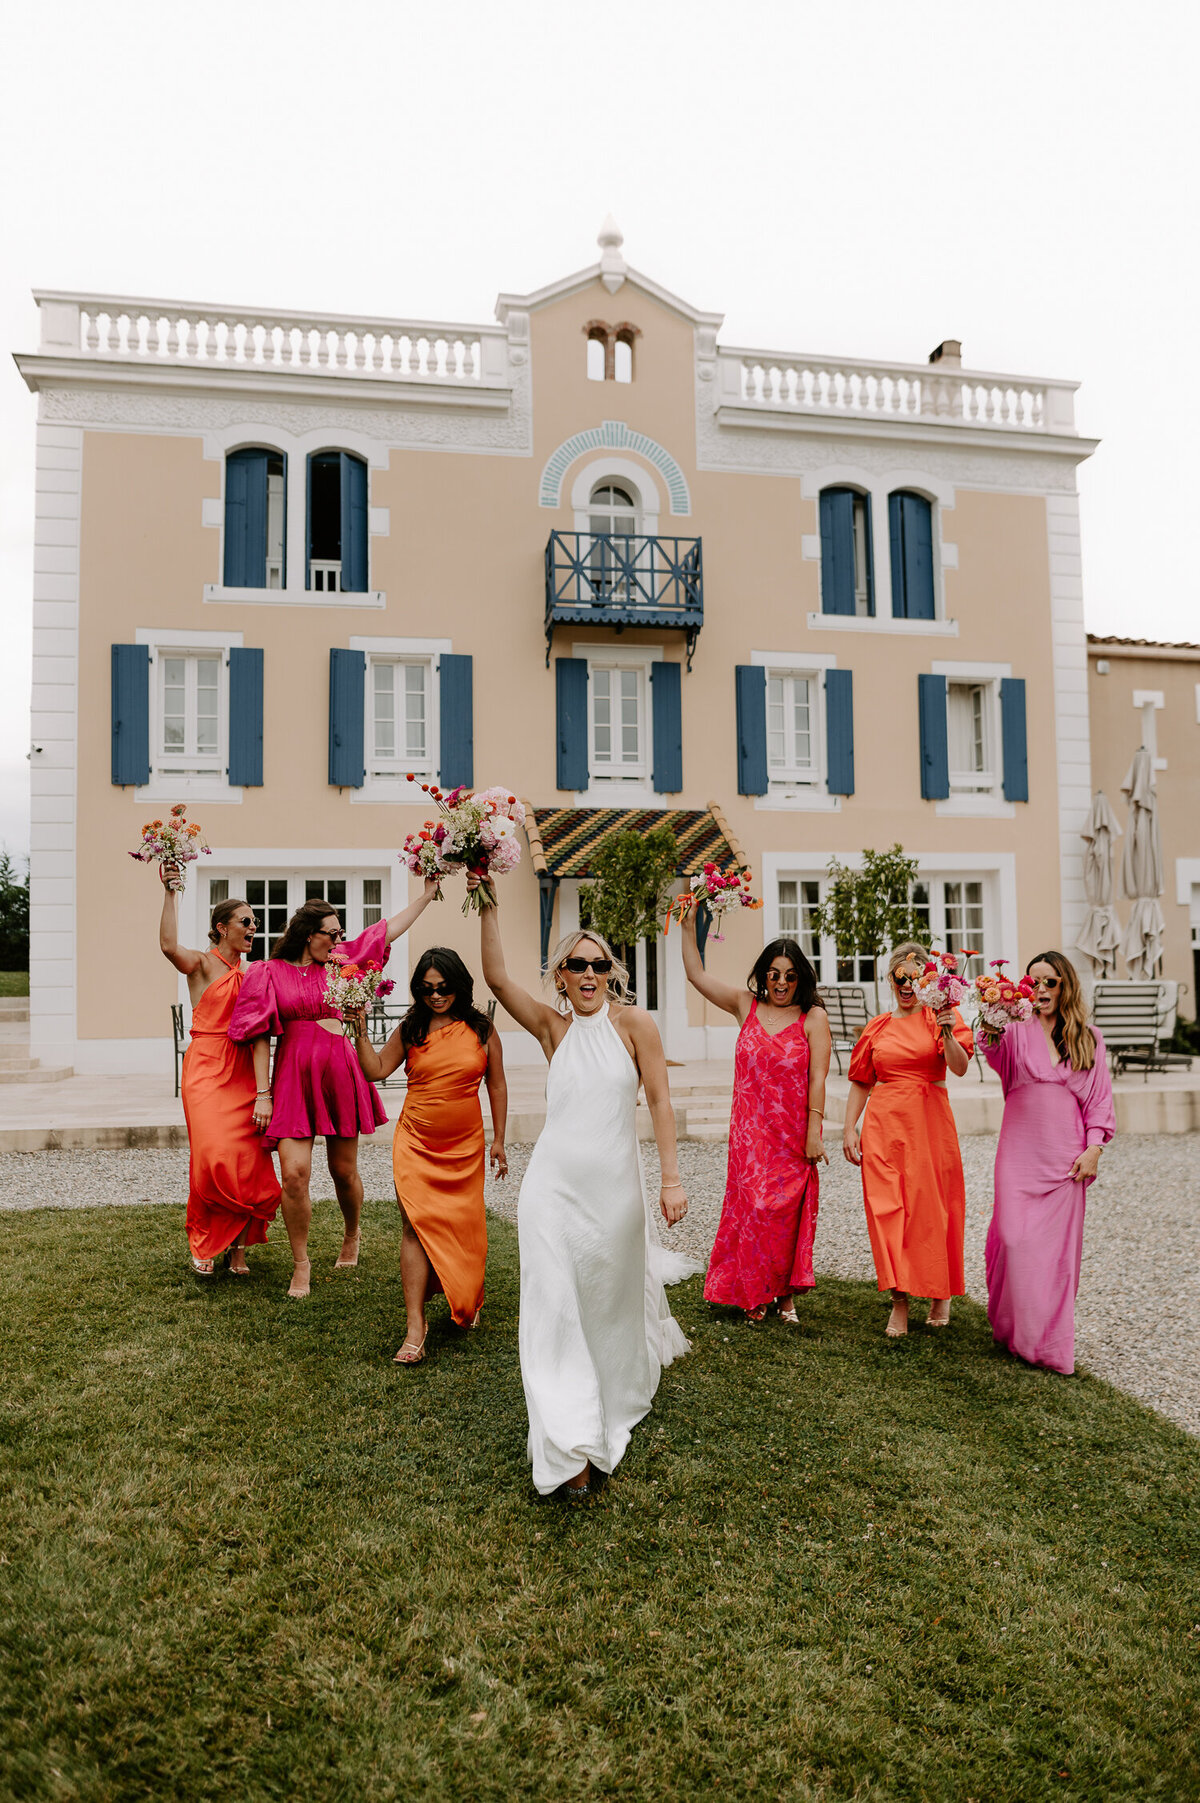 A bride leads her bridesmaids who are wearing pink and orange dress at a wedding in France